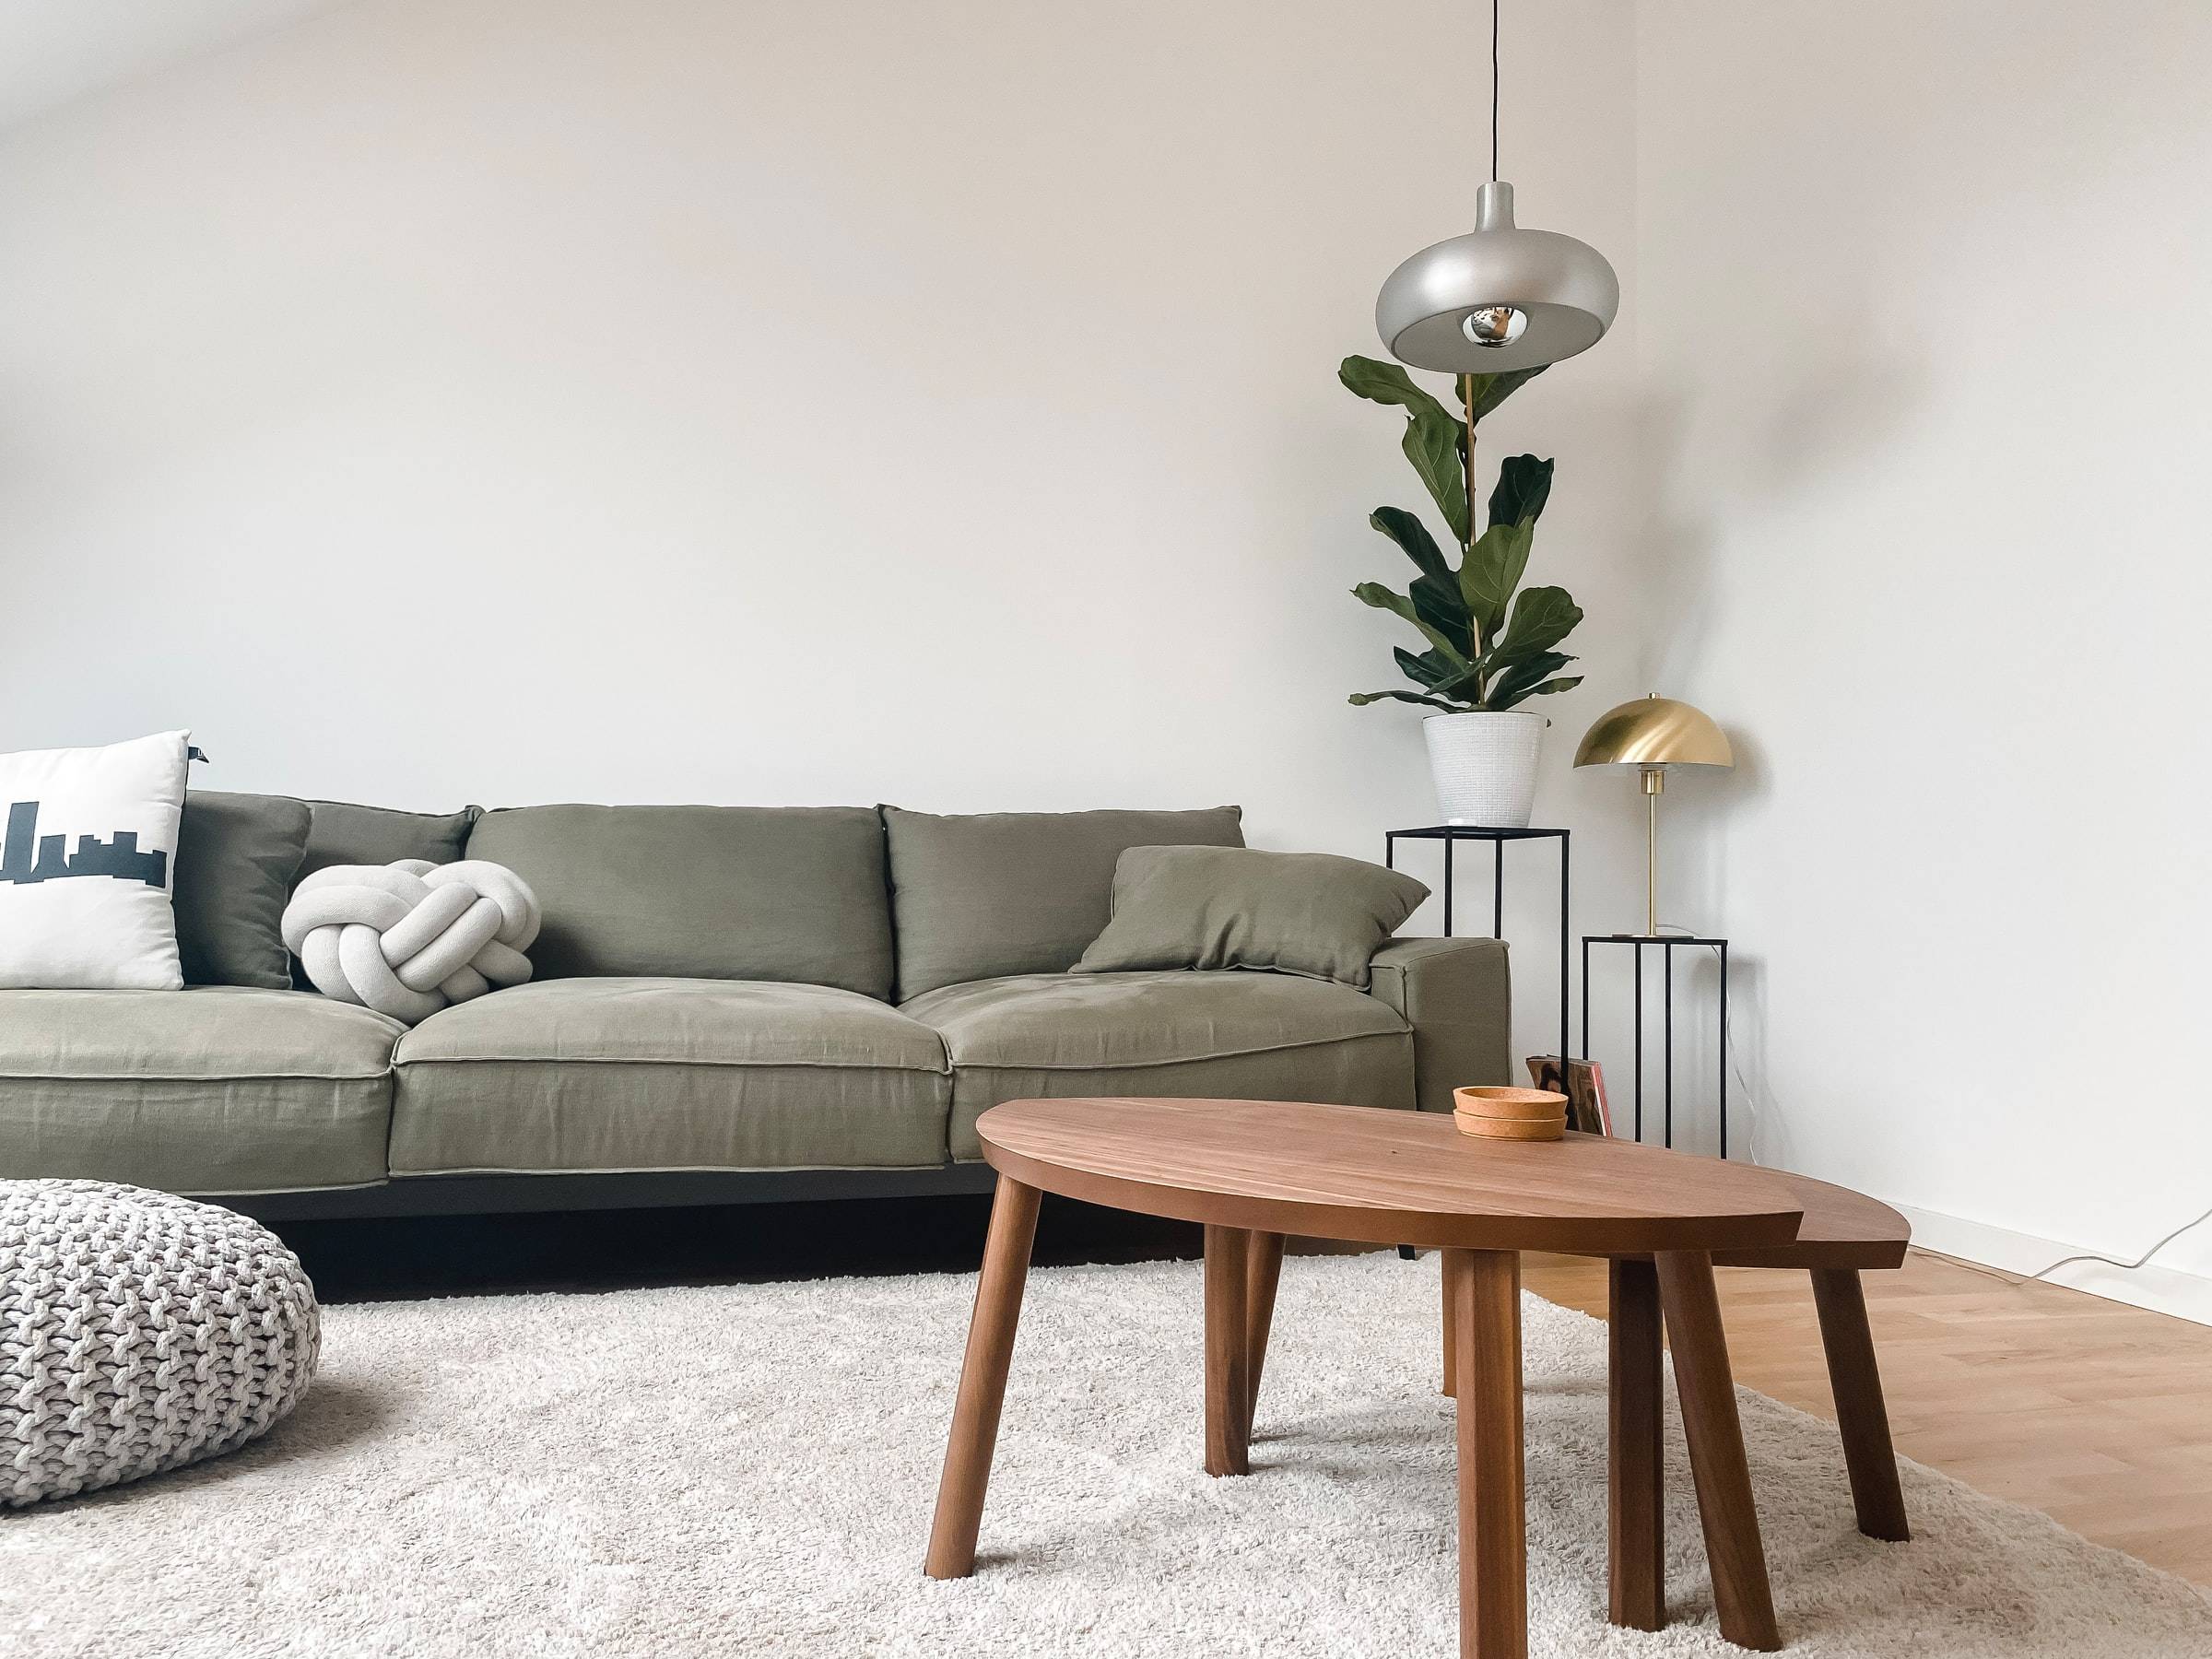 Cheap furniture will be replaced with high-quality alternatives (from Unsplash)